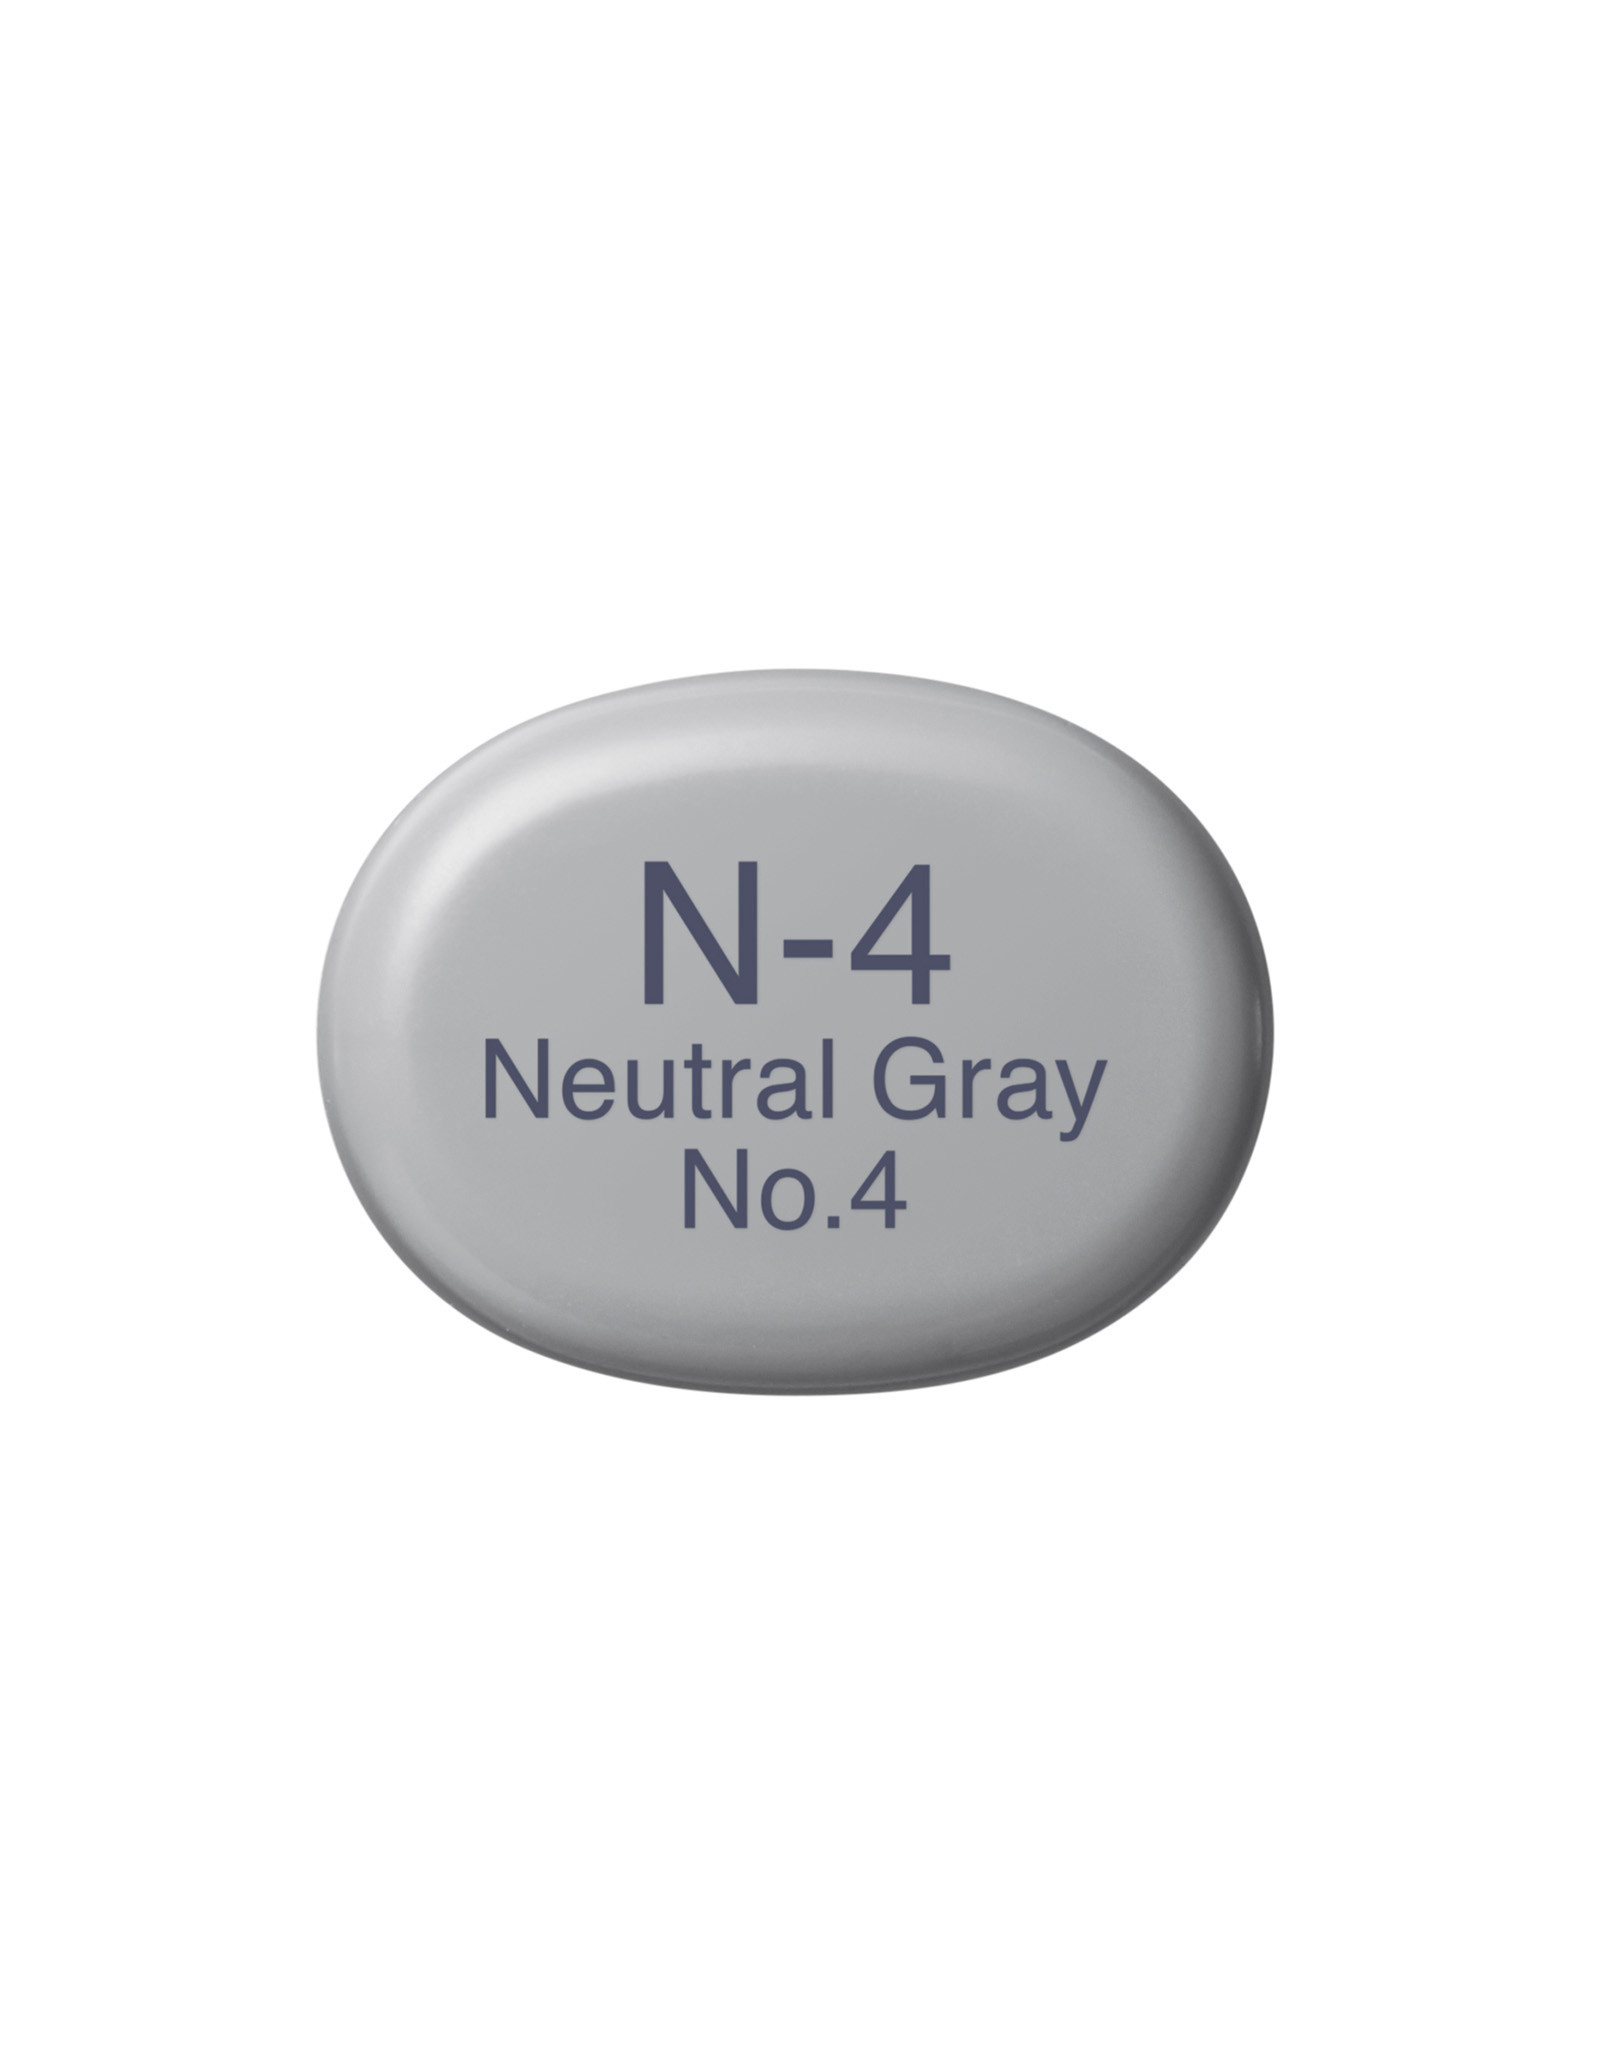 COPIC COPIC Sketch Marker N4 Neutral Gray 4